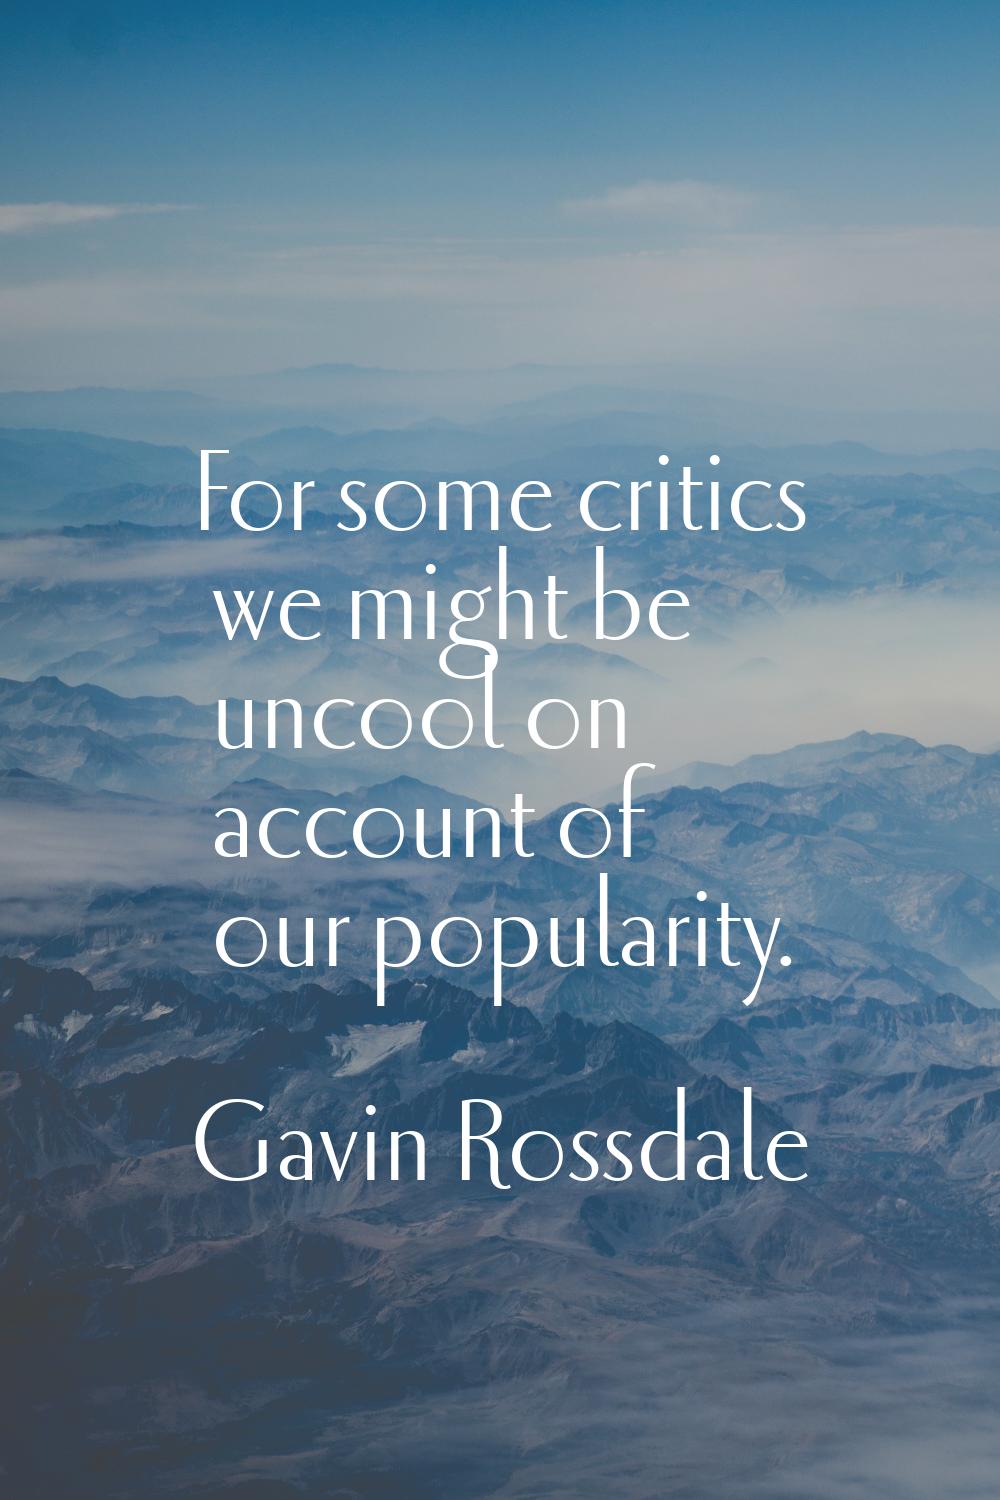 For some critics we might be uncool on account of our popularity.